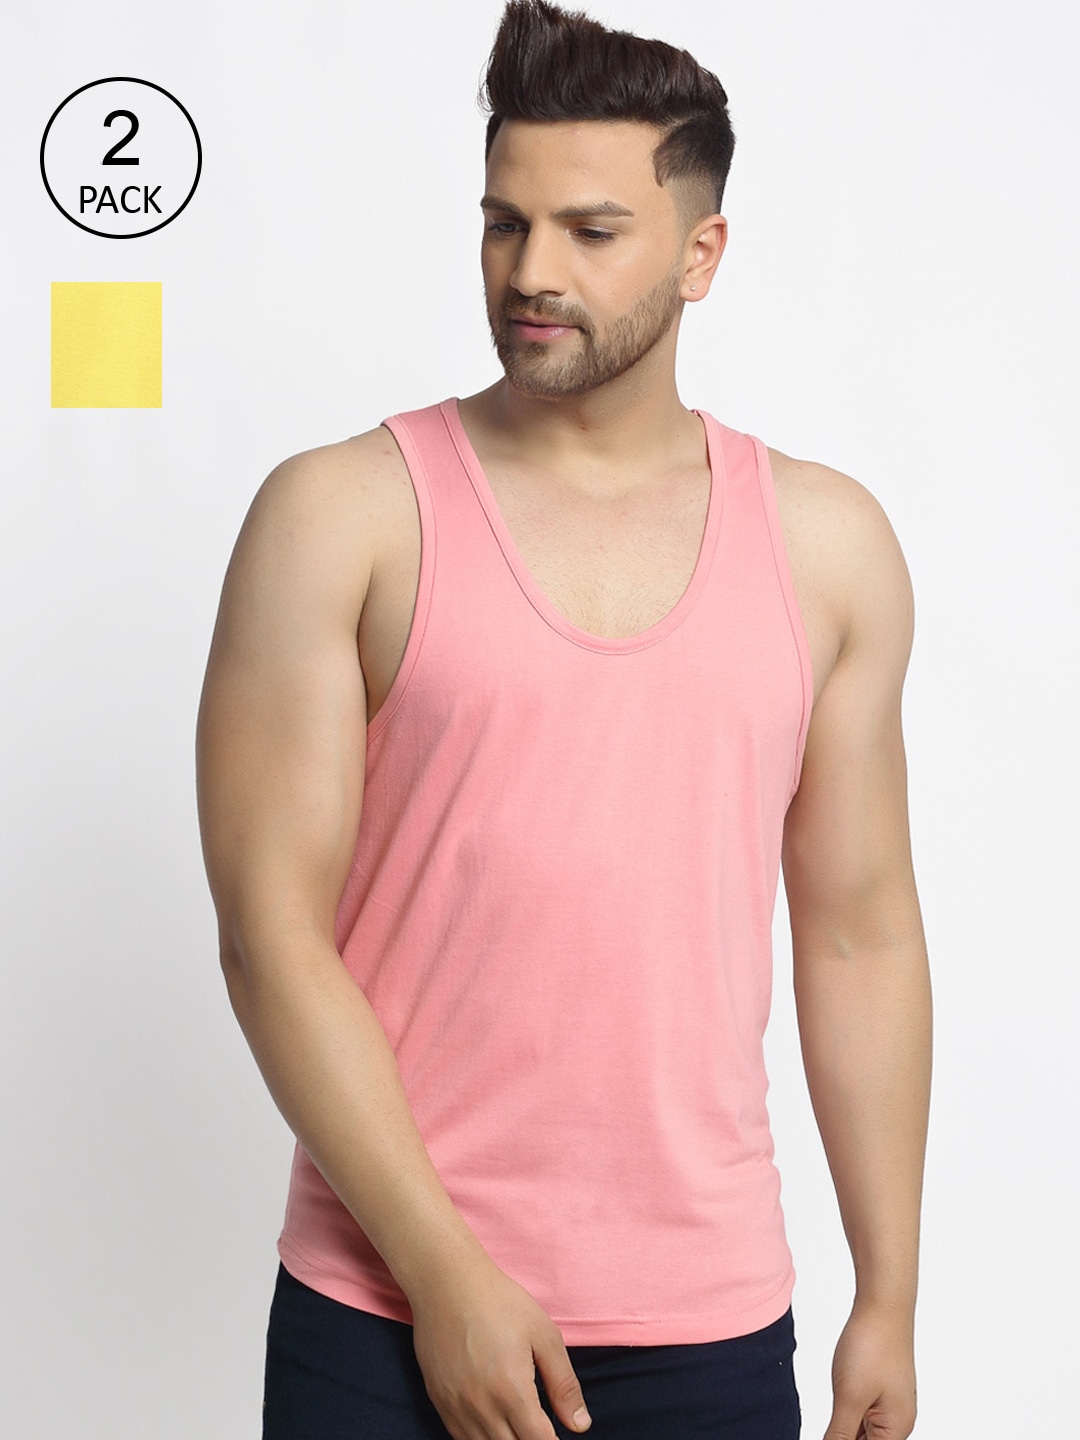 Clothing Innerwear Vests | Friskers Men Pack Of 2 Solid Pure Cotton Casual Gym Vests - VG17966